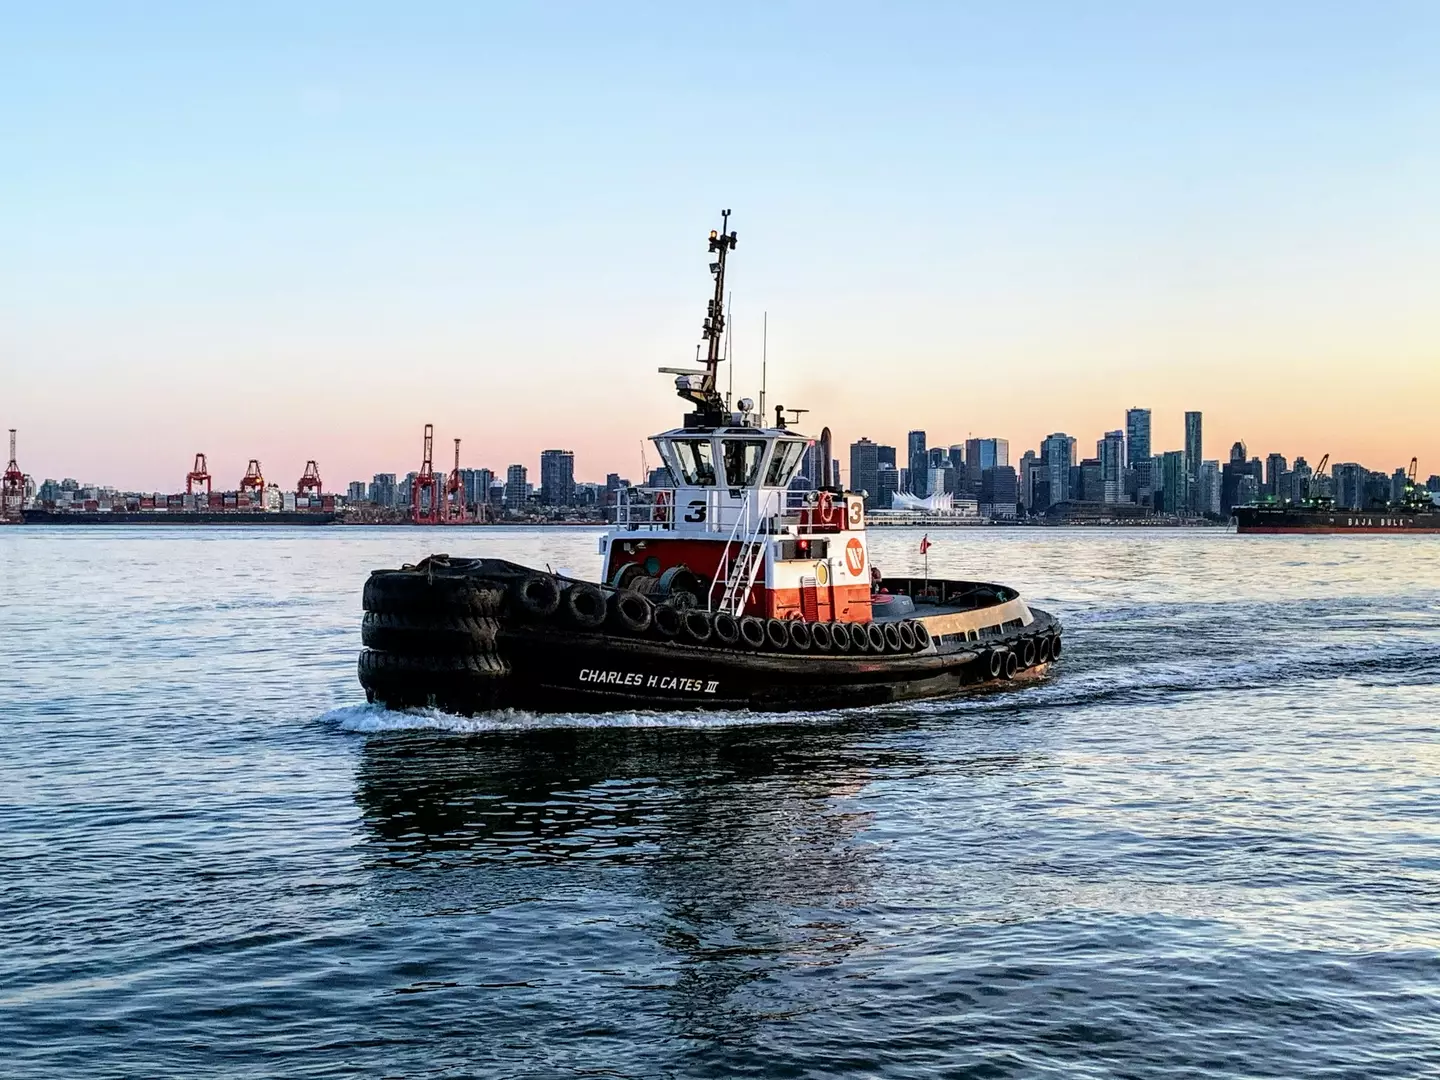 Injuries for workers on tugboats can sometimes be 'unavoidable'.